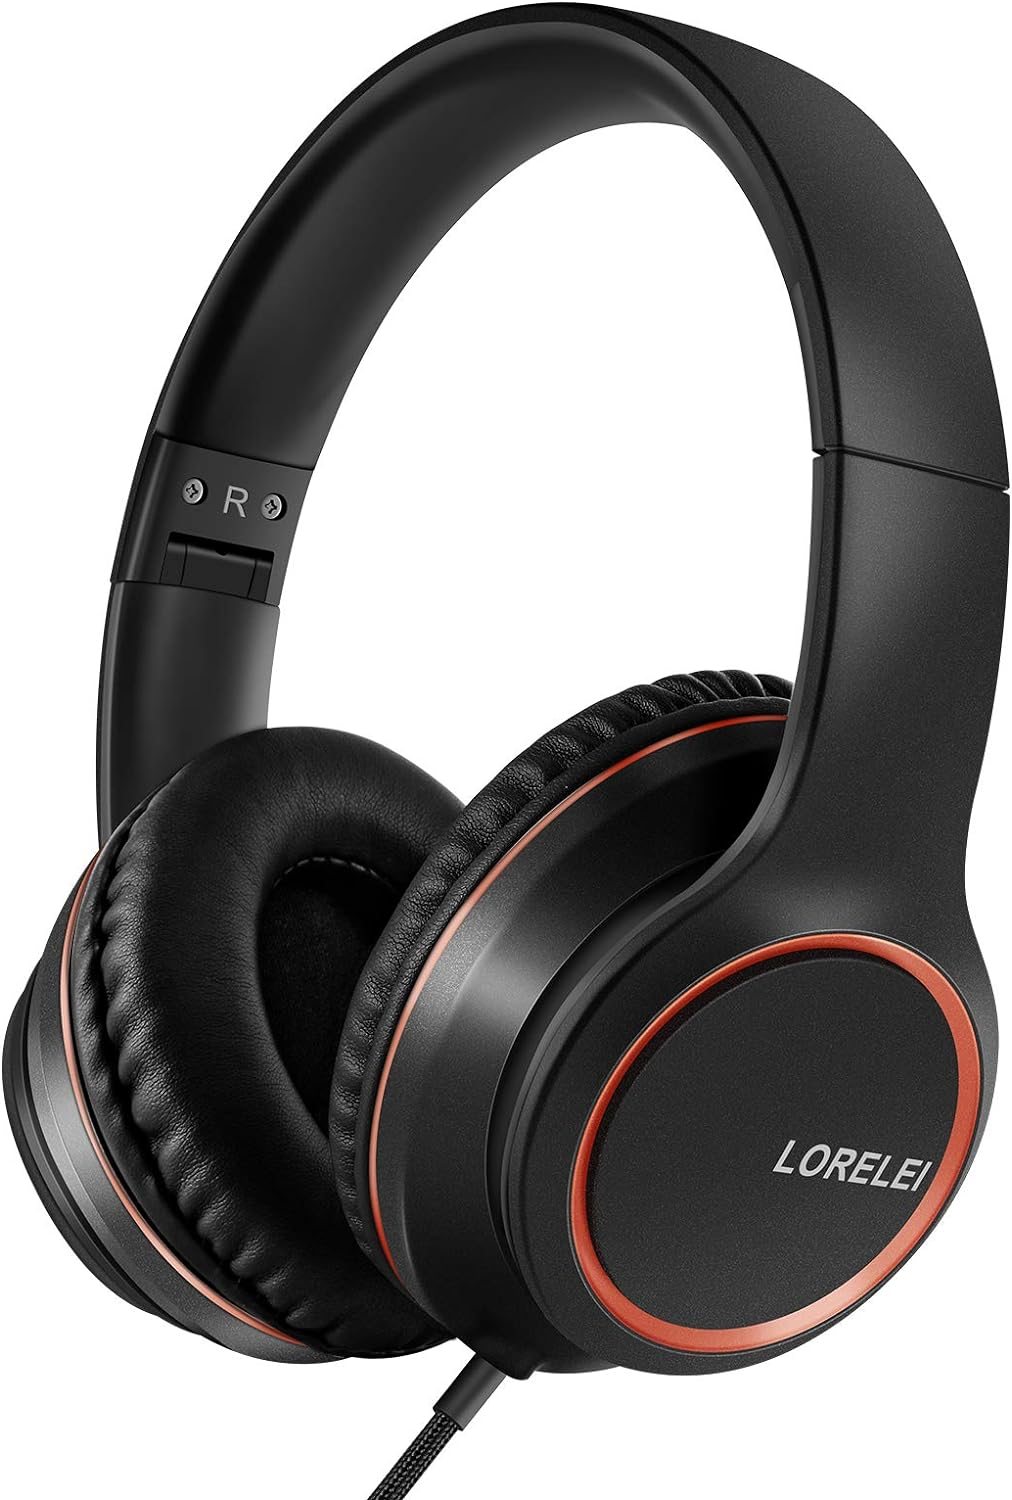 LORELEI X8 Over-Ear Wired Headphones with Microphone with 1.45m-Tangle-Free Nylon Line3.5mm Plug,Lightweight Foldable  Portable Headphones for Smartphone,Tablet,Computer,Mp3/4(Dark Purple)